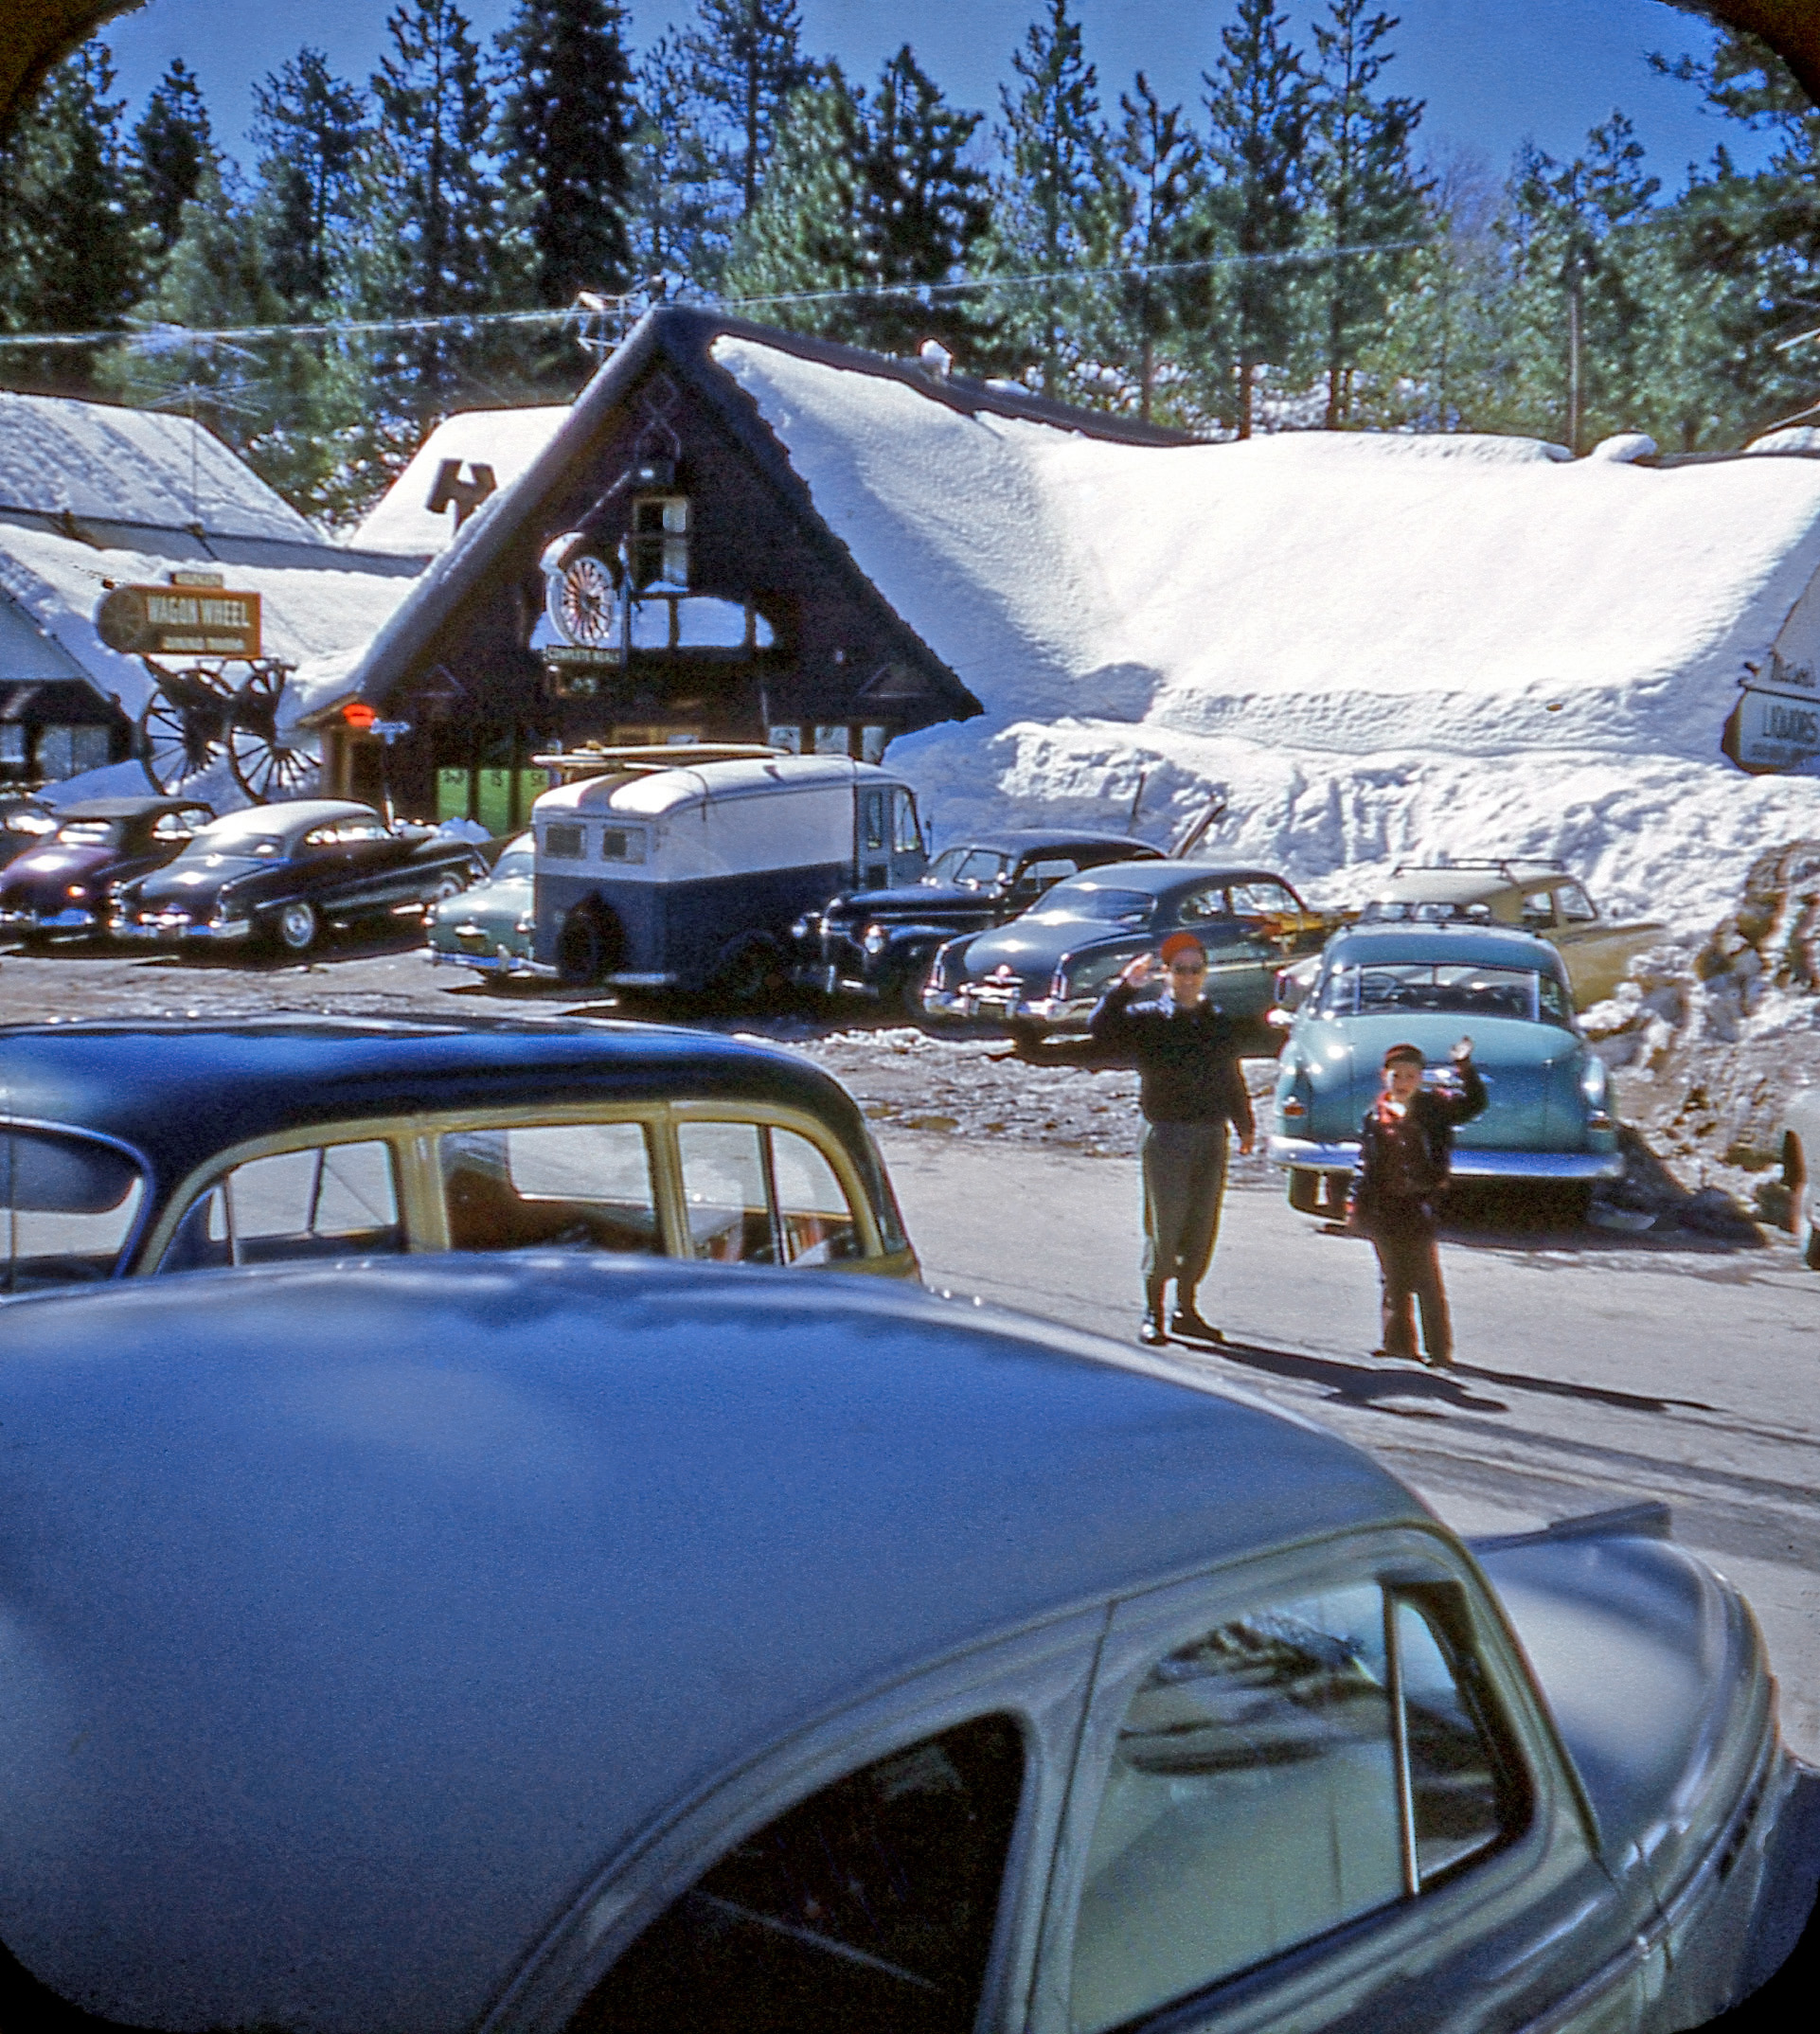 The Wagon Wheel Cafe in Running Springs California in the early 1950s. It burned down in 1974. A slide I found in a thrift store. View full size.